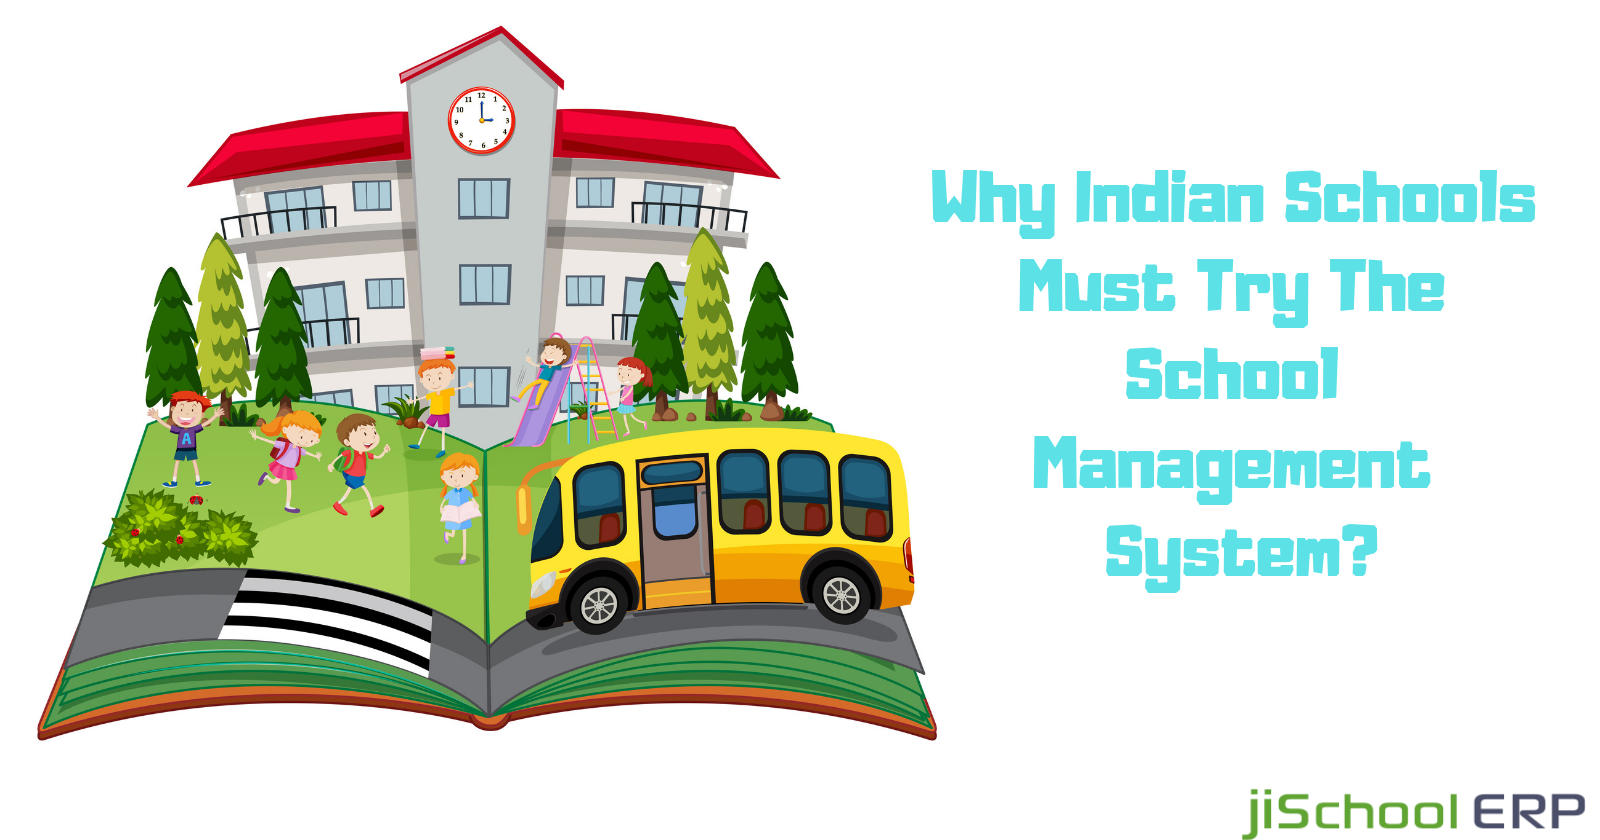 Why Indian Schools Must Try The School Management System?